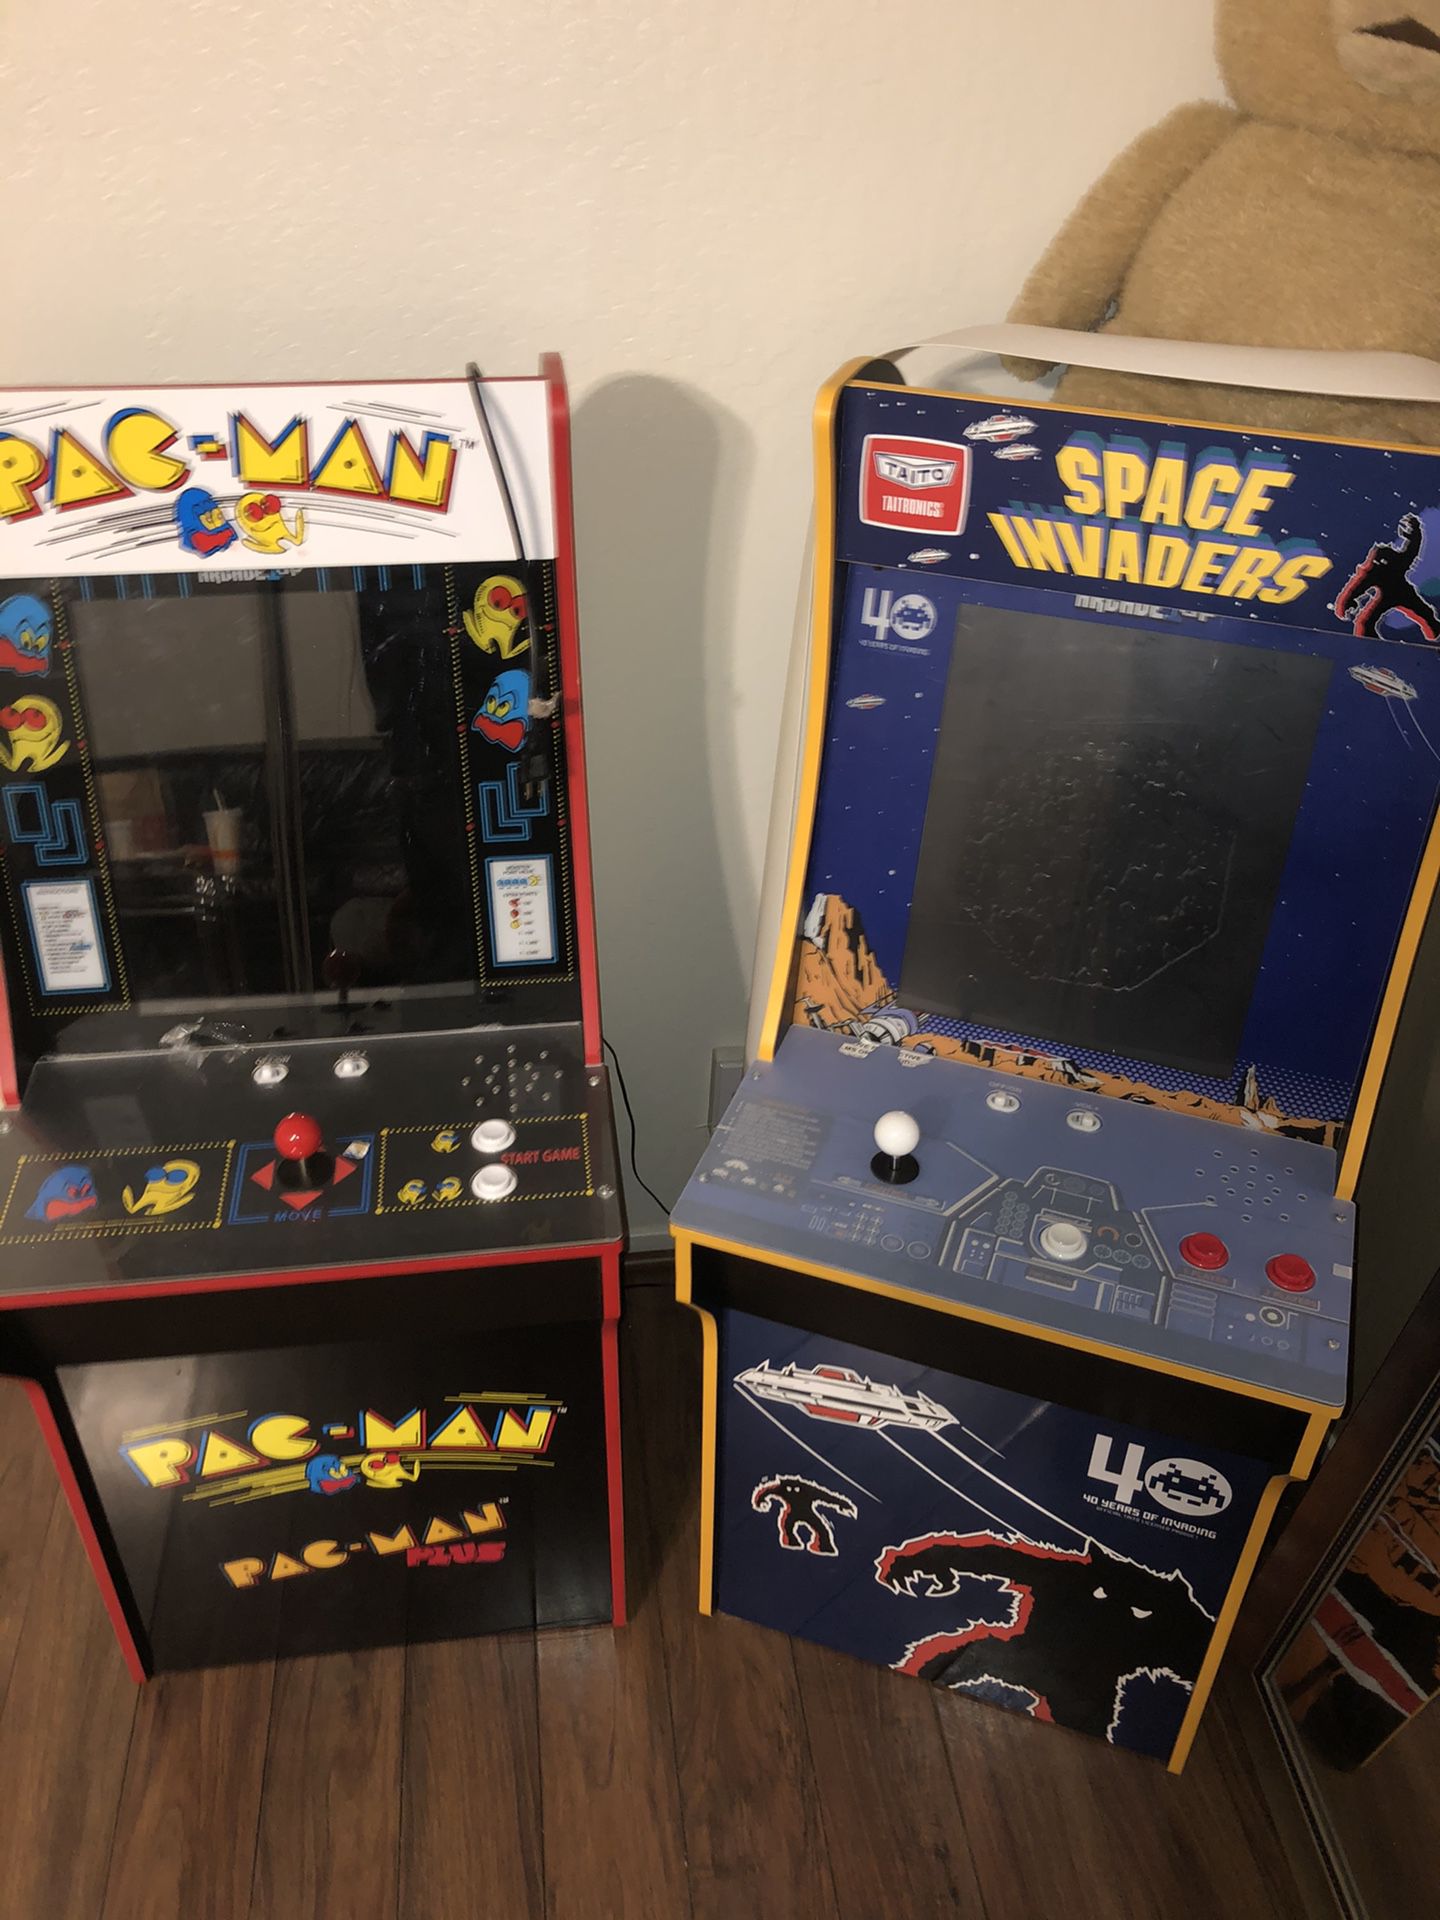 Arcade 1up space invaders